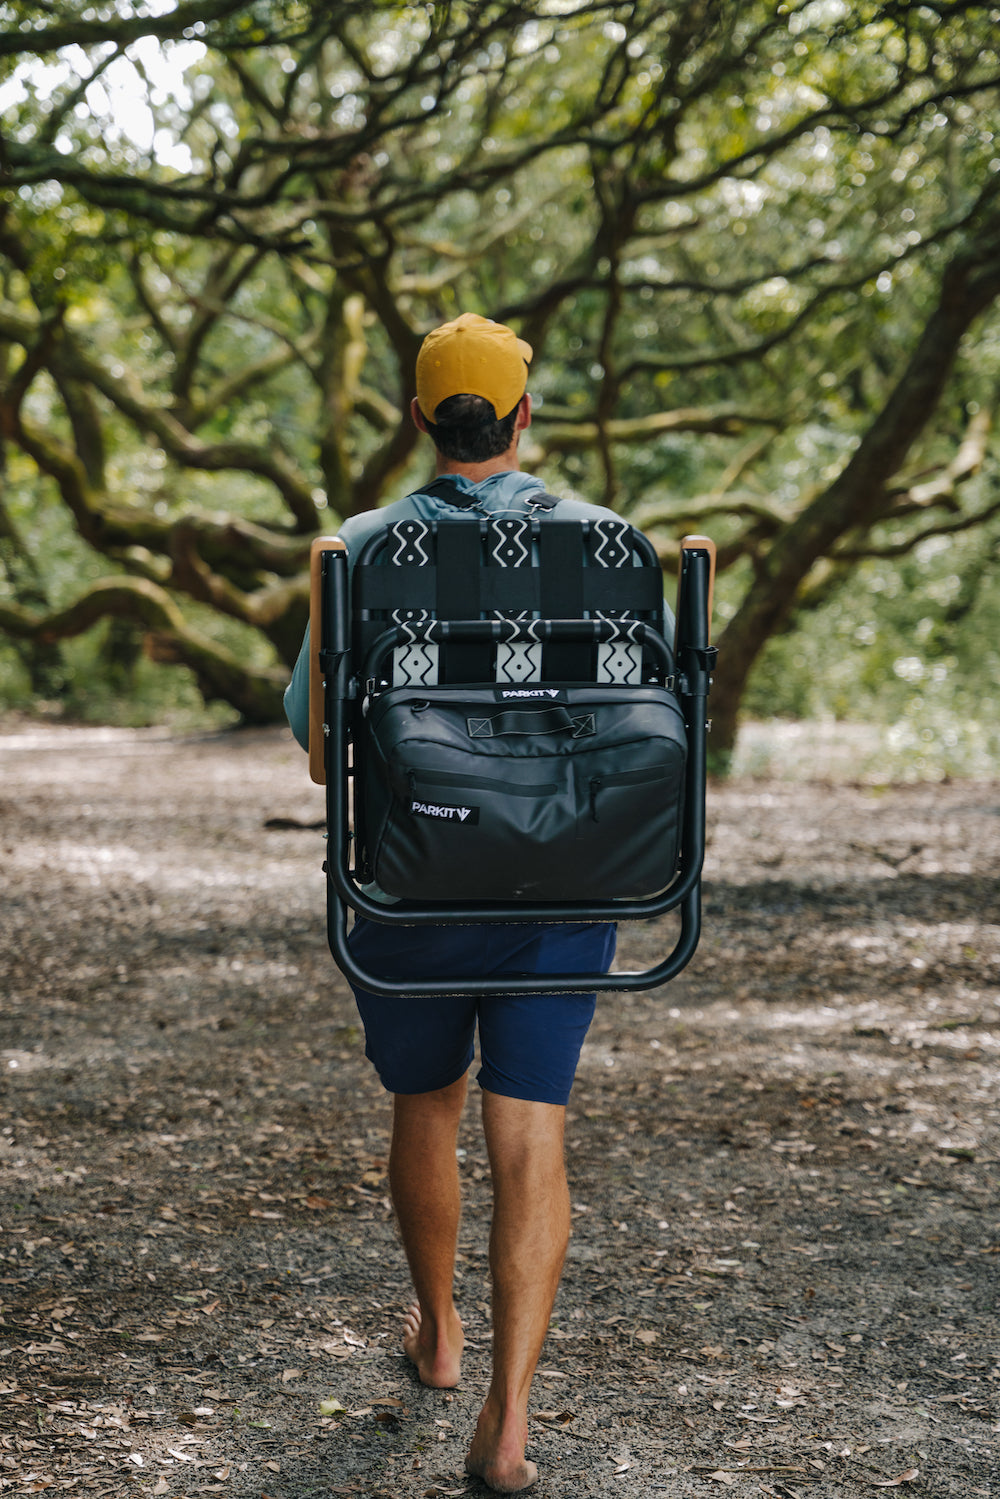 Man Carrying Voyager outdoor chair on a hike